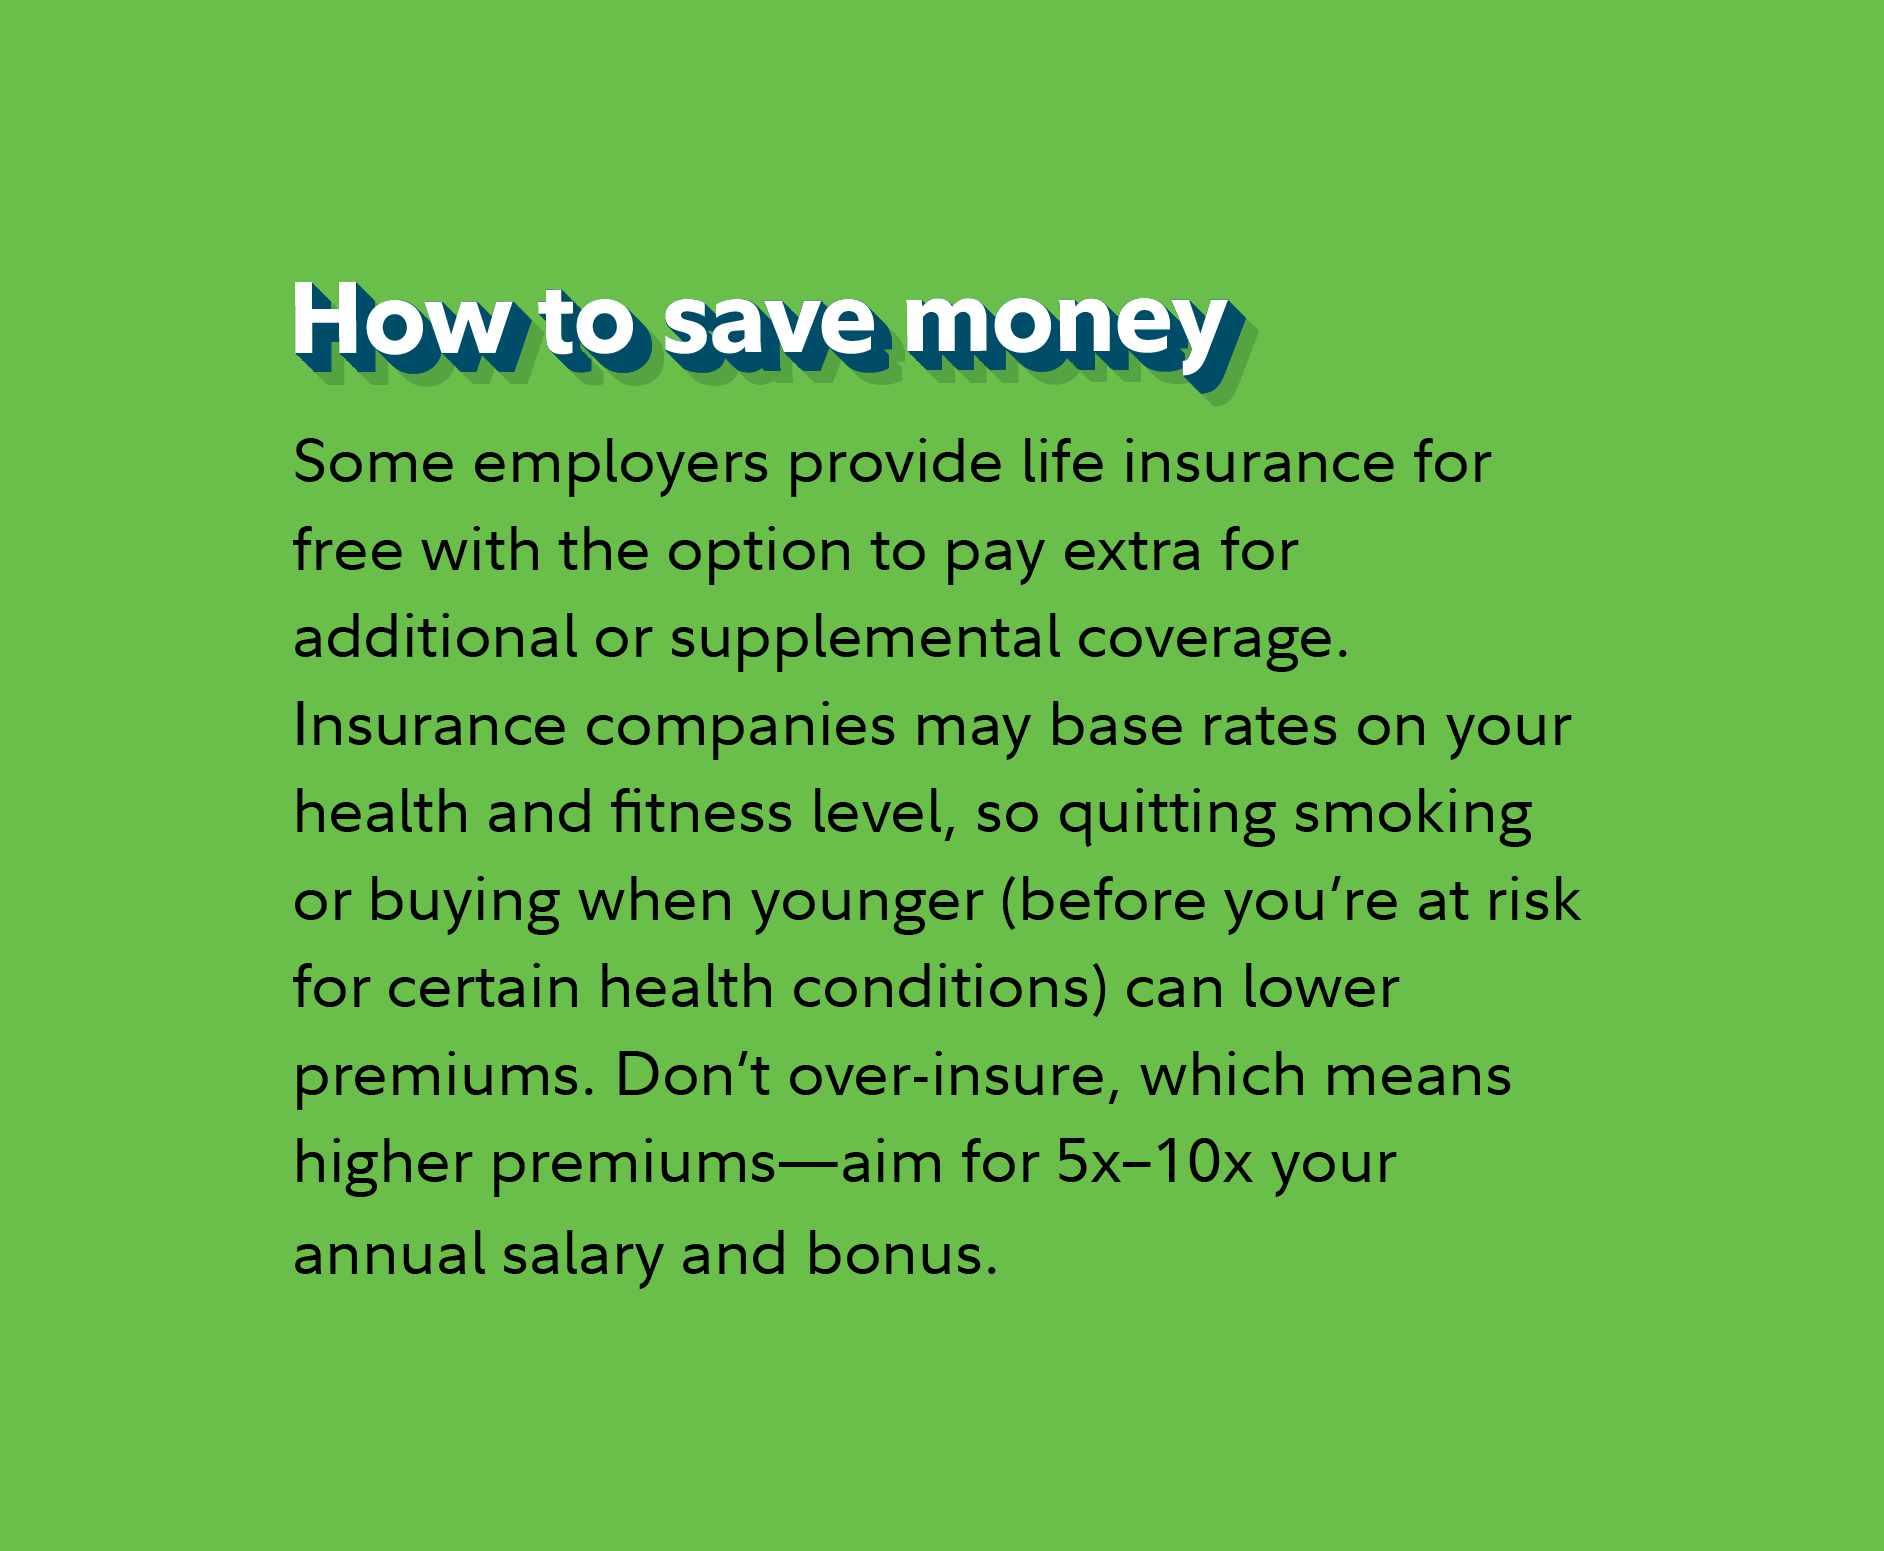 How to save money Some employers provide life insurance for free with the option to pay extra for additional or supplemental coverage. Insurance companies may base rates on your health and fitness level, so quitting smoking or buying when younger (before you’re at risk for certain health conditions) can lower premiums. Don’t over-insure, which means higher premiums—aim for 5–10x your annual salary and bonus.